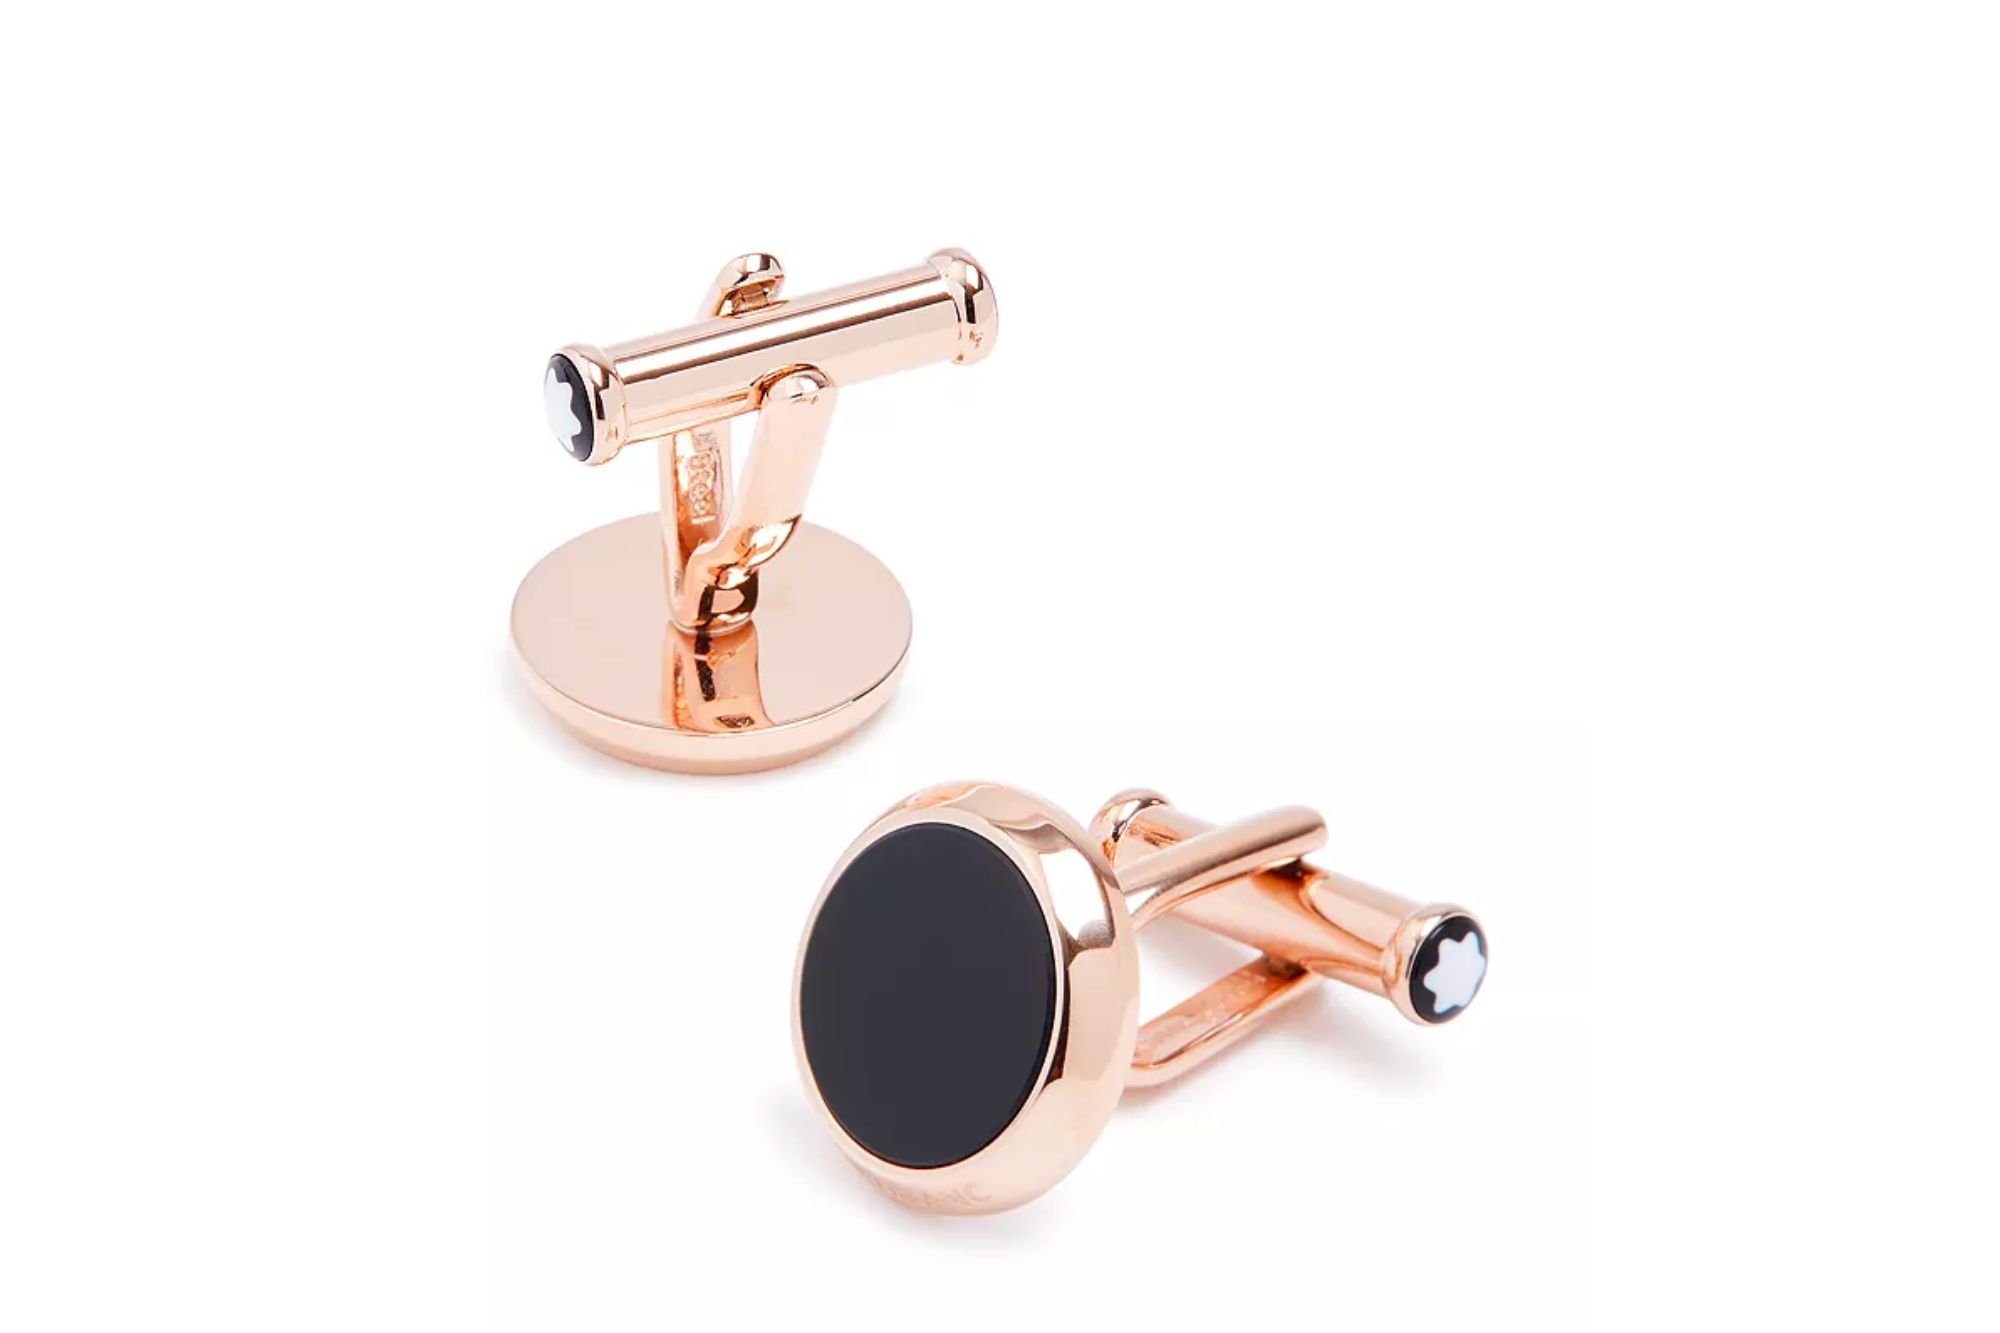 A pair of rose gold and onyx cufflinks.